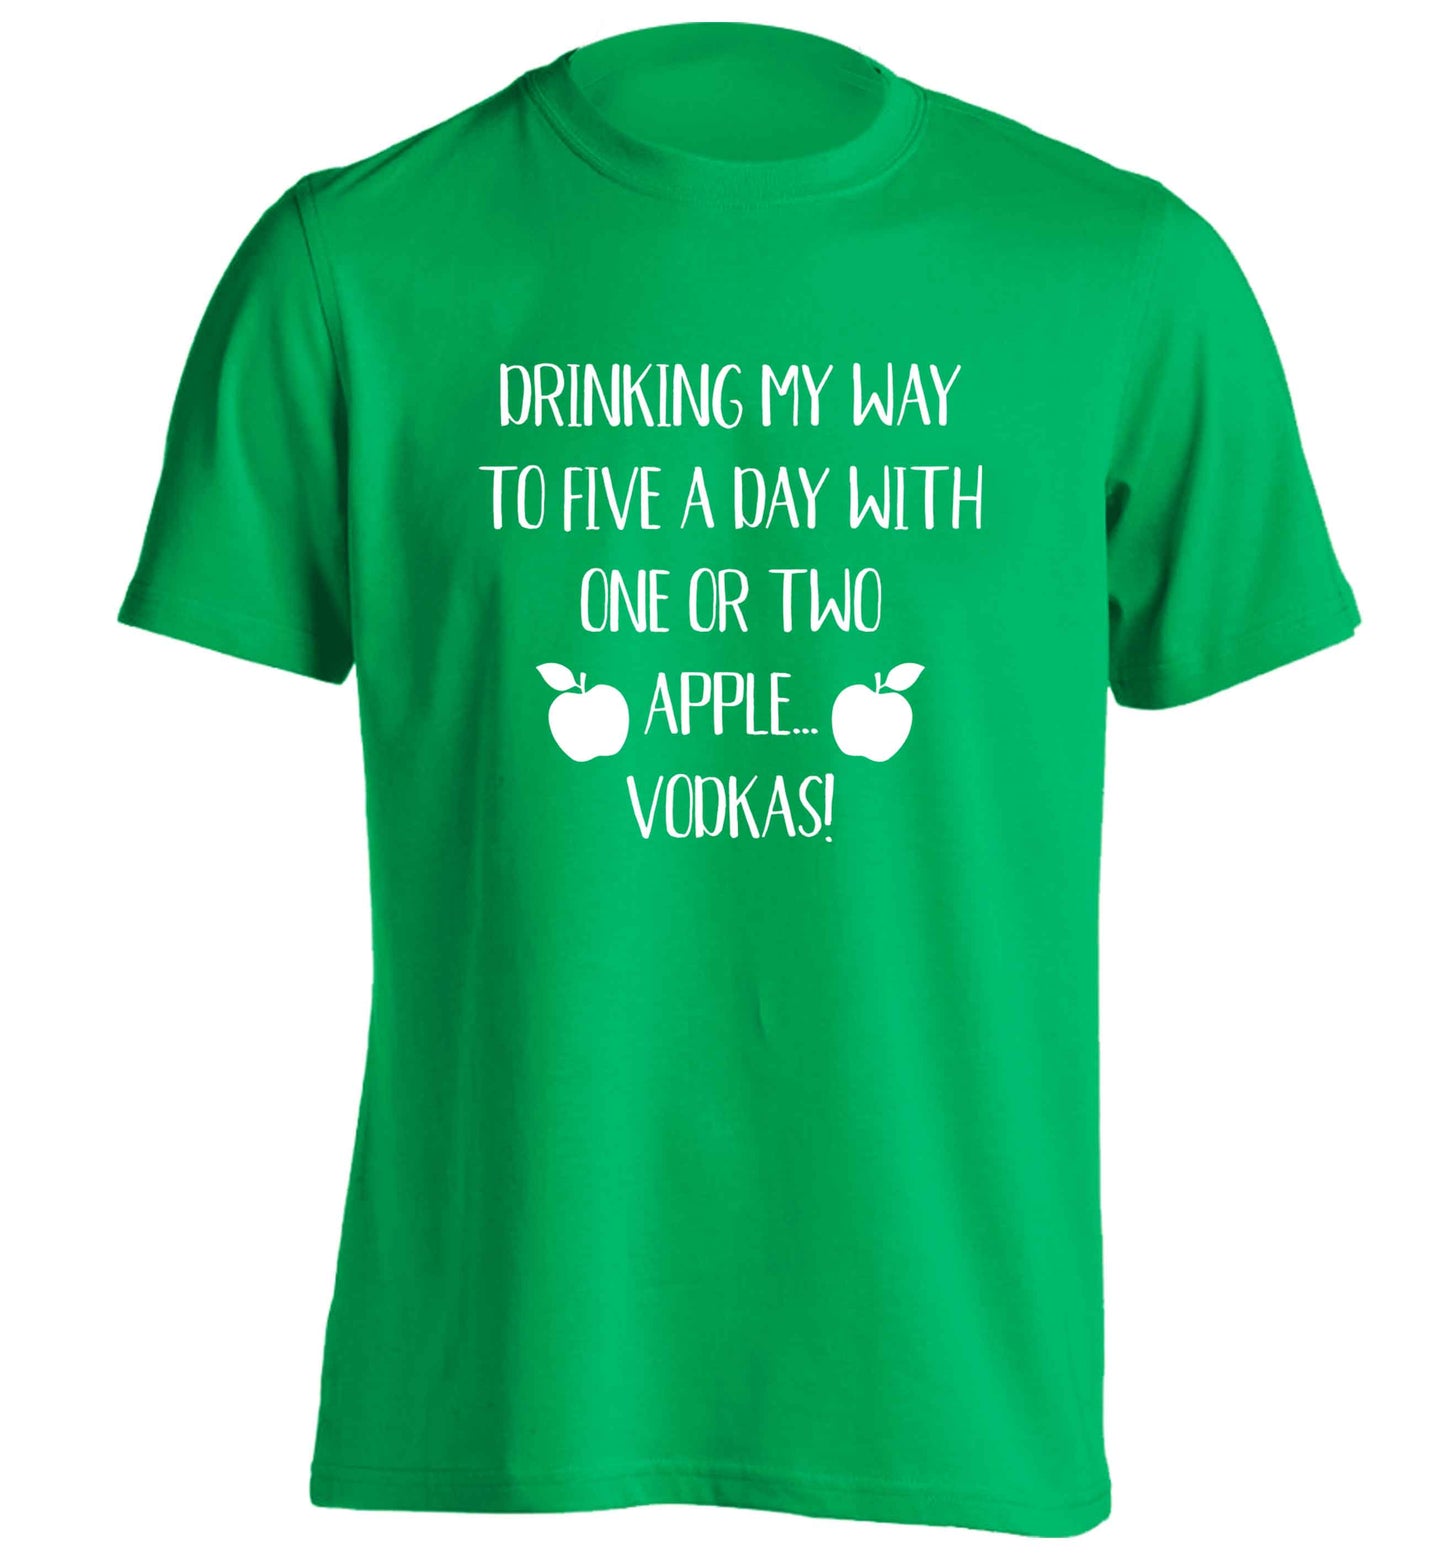 Drinking my way to five a day with one or two apple vodkas adults unisex green Tshirt 2XL